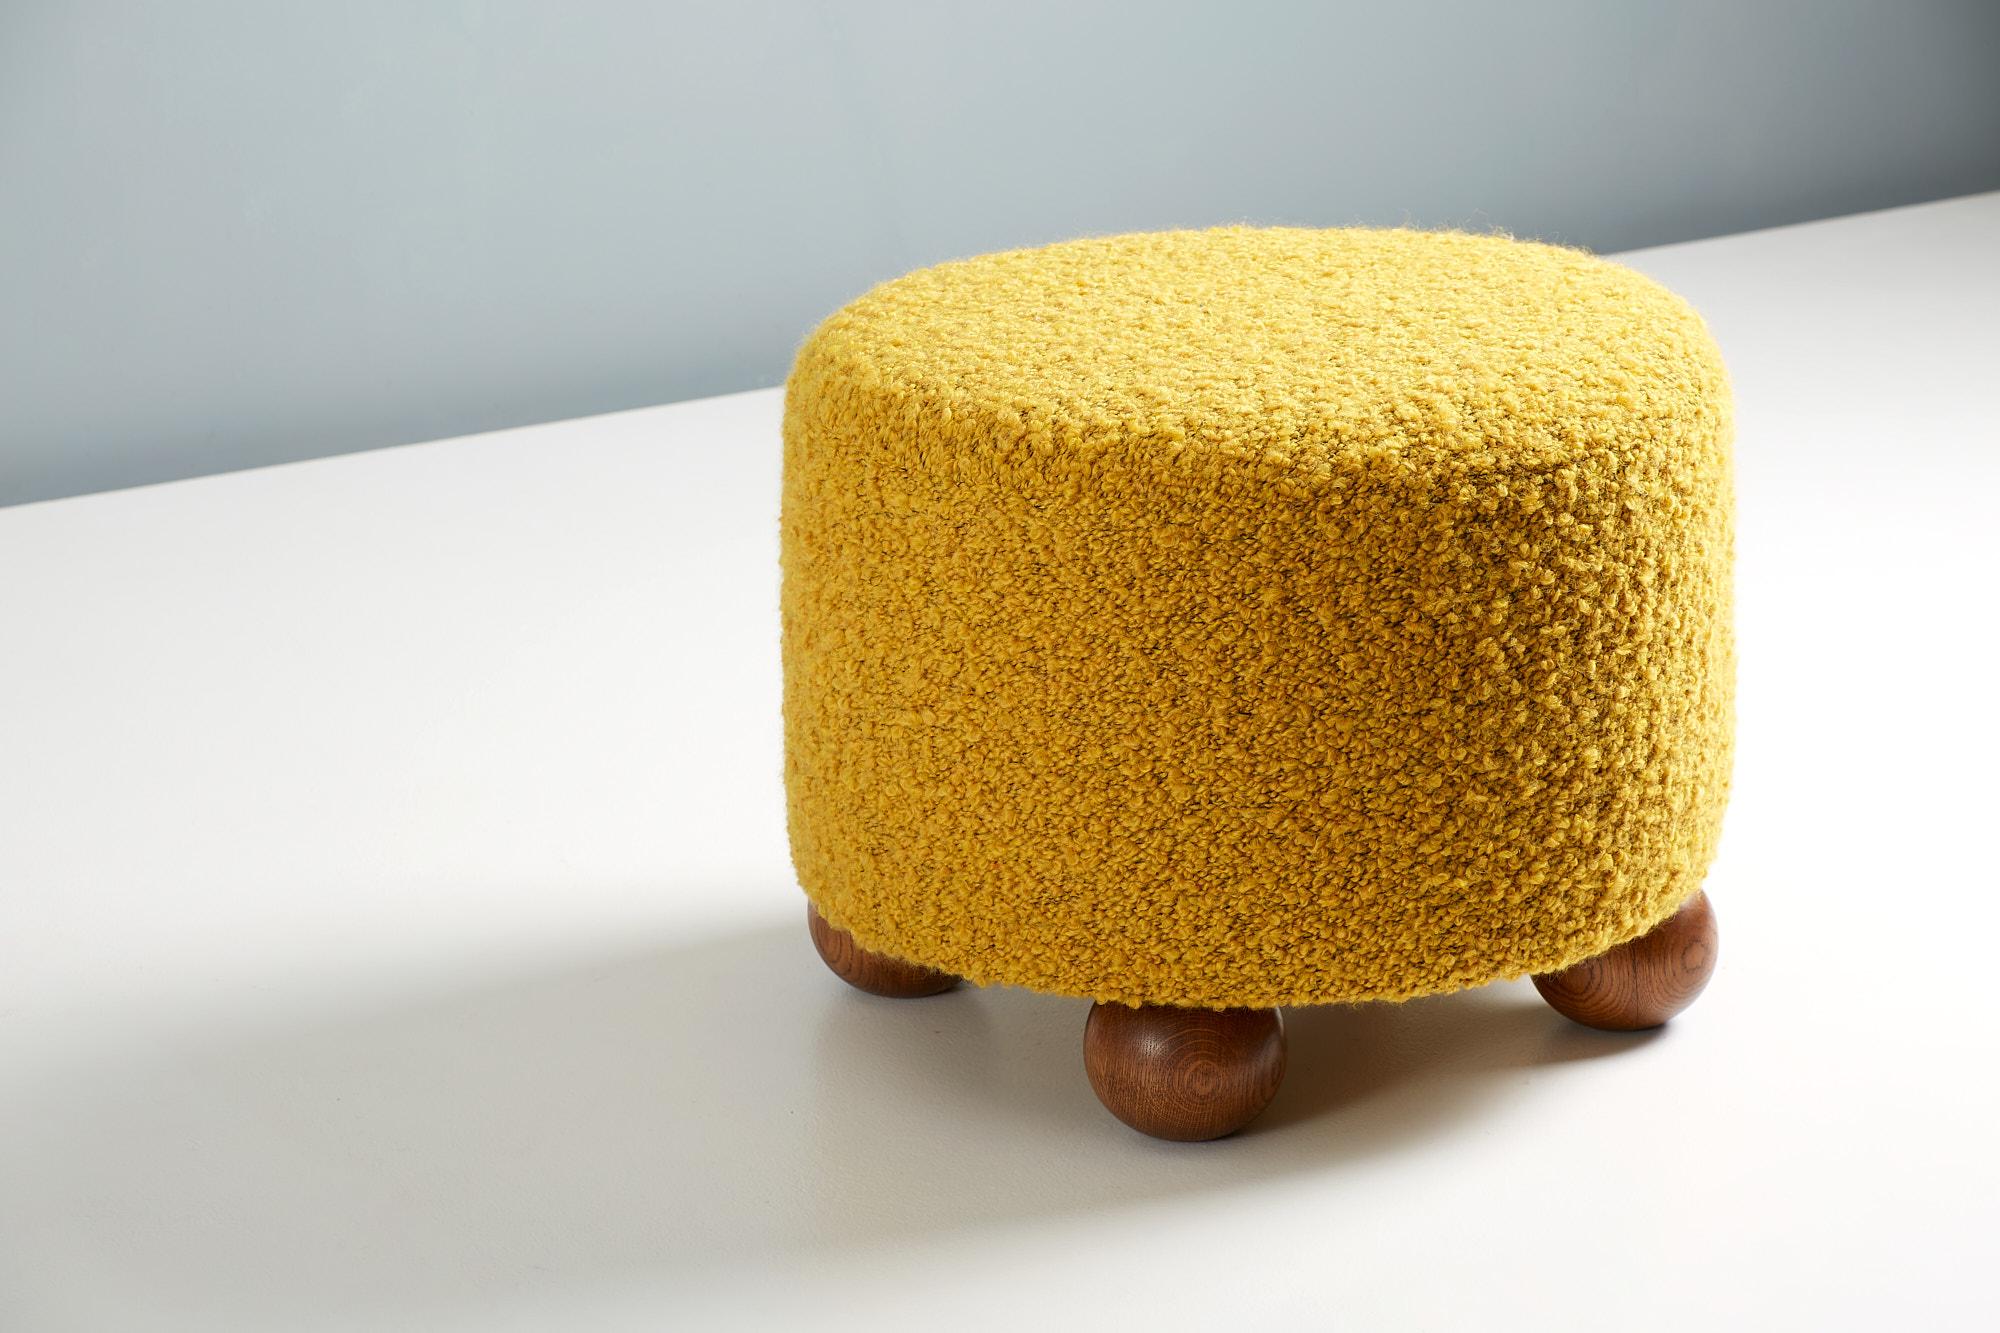 Dagmar Design - Luupo Ottoman.

A custom-made ottoman developed & produced at our workshops in London using the highest quality materials. This example has been upholstered in Pierre Frey OPIO boucle fabric in a vivid yellow colour tone. The